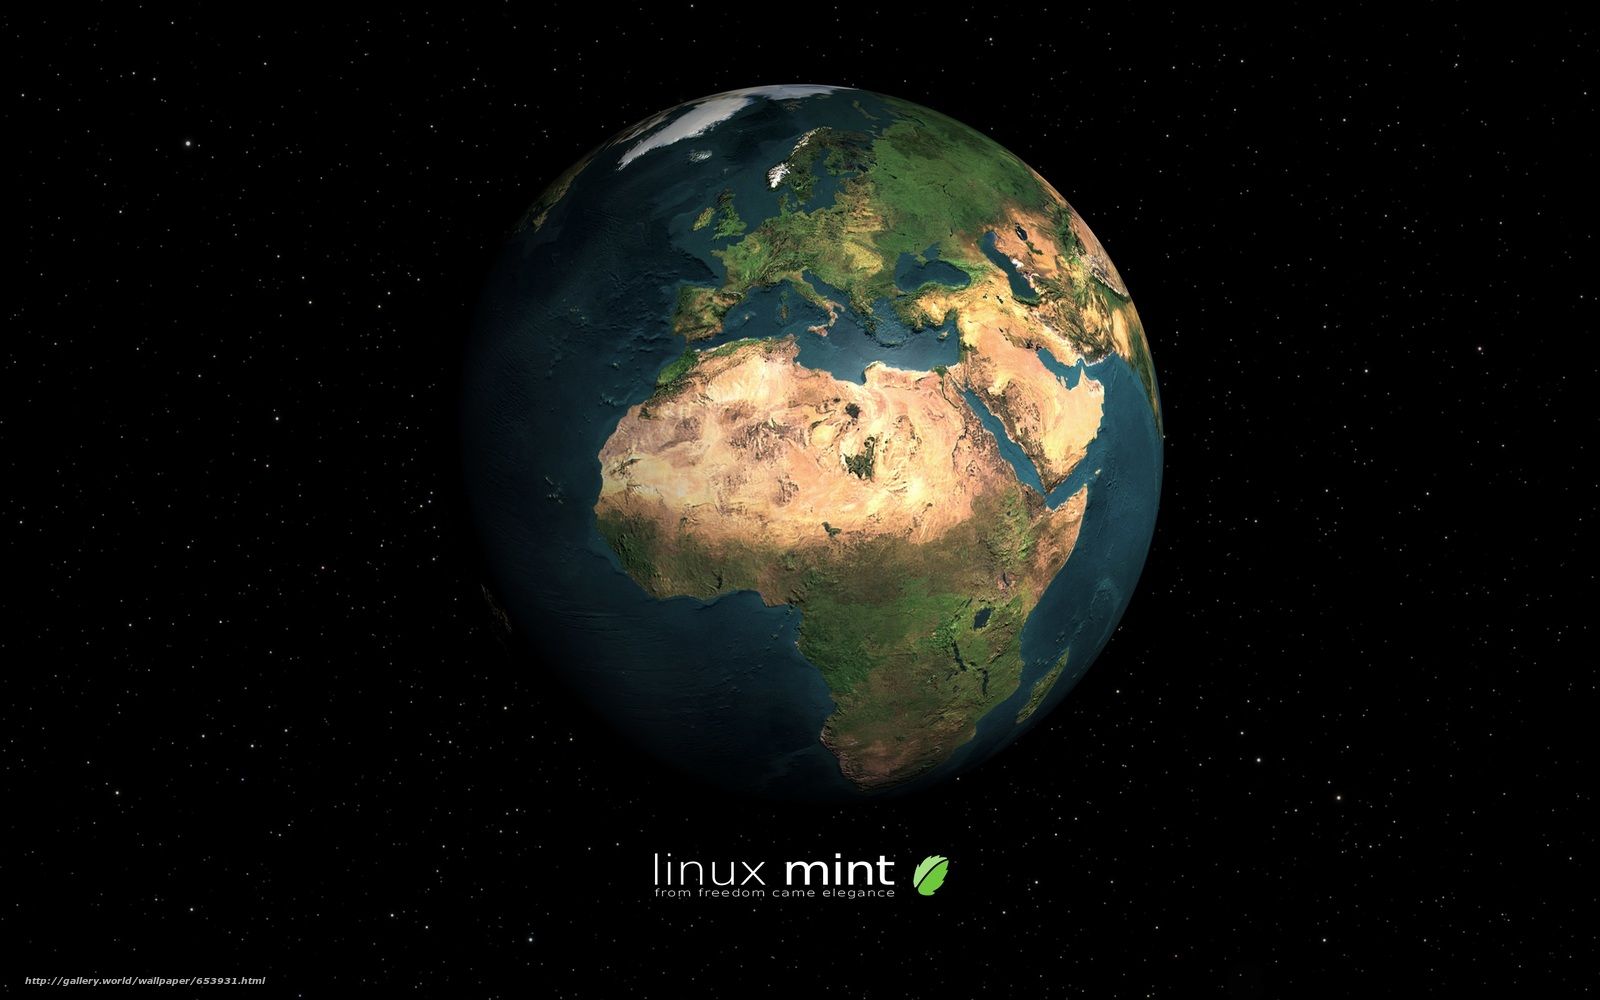 Download wallpaper Linux Mint, mint, operating system, computer